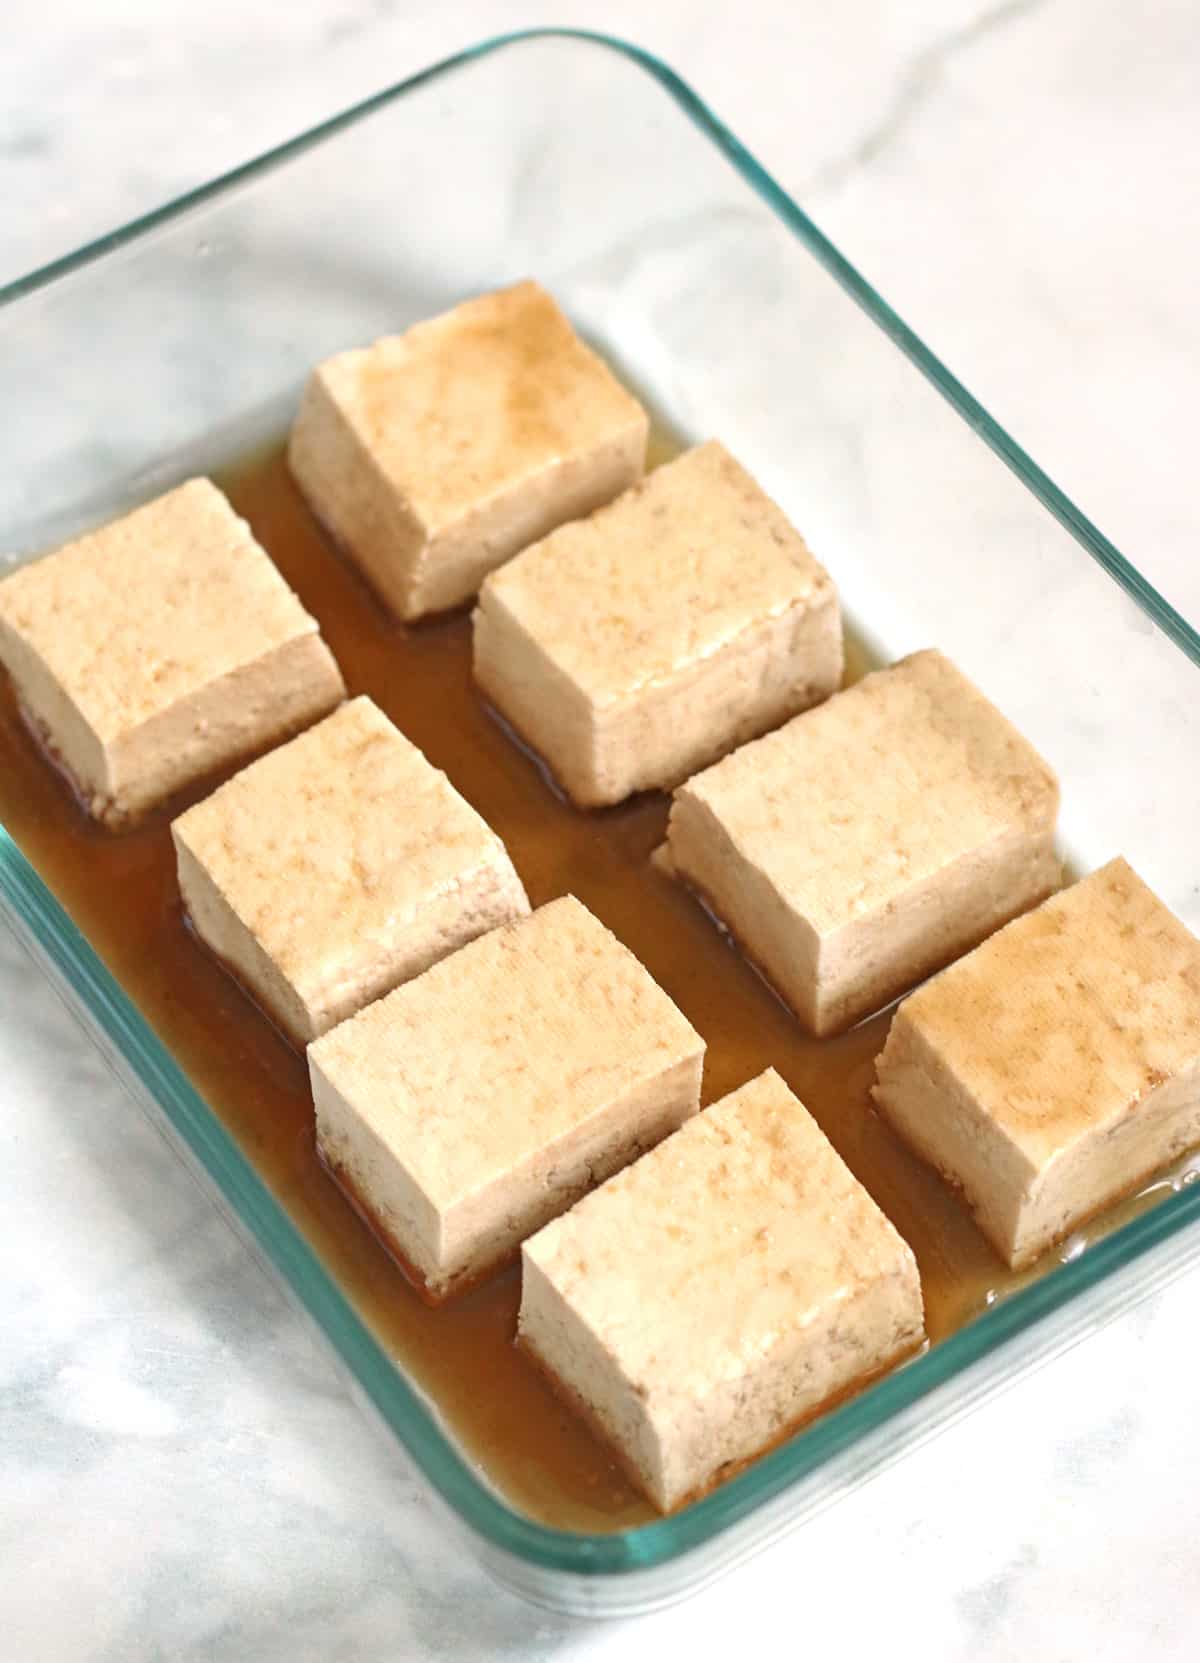 tofu squares being marinated in a glass bowl.